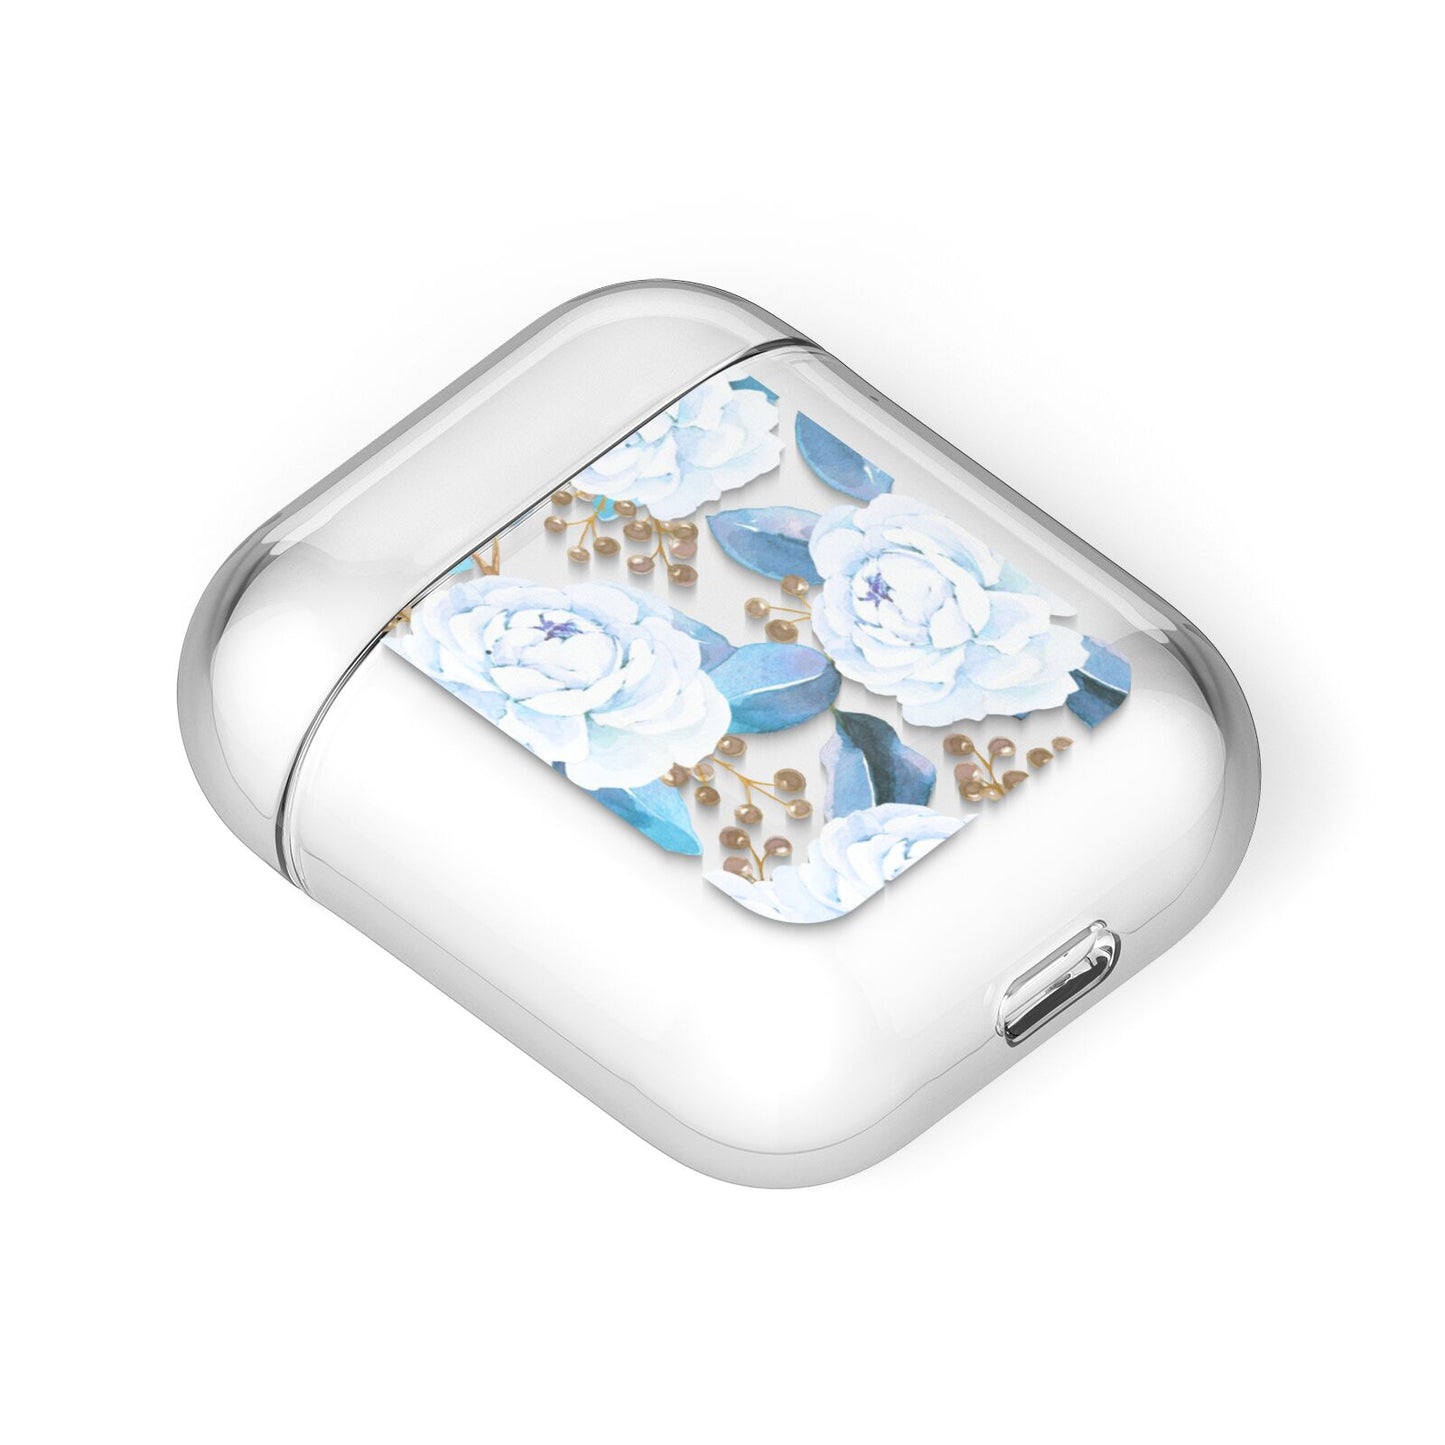 White Peonies AirPods Case Laid Flat